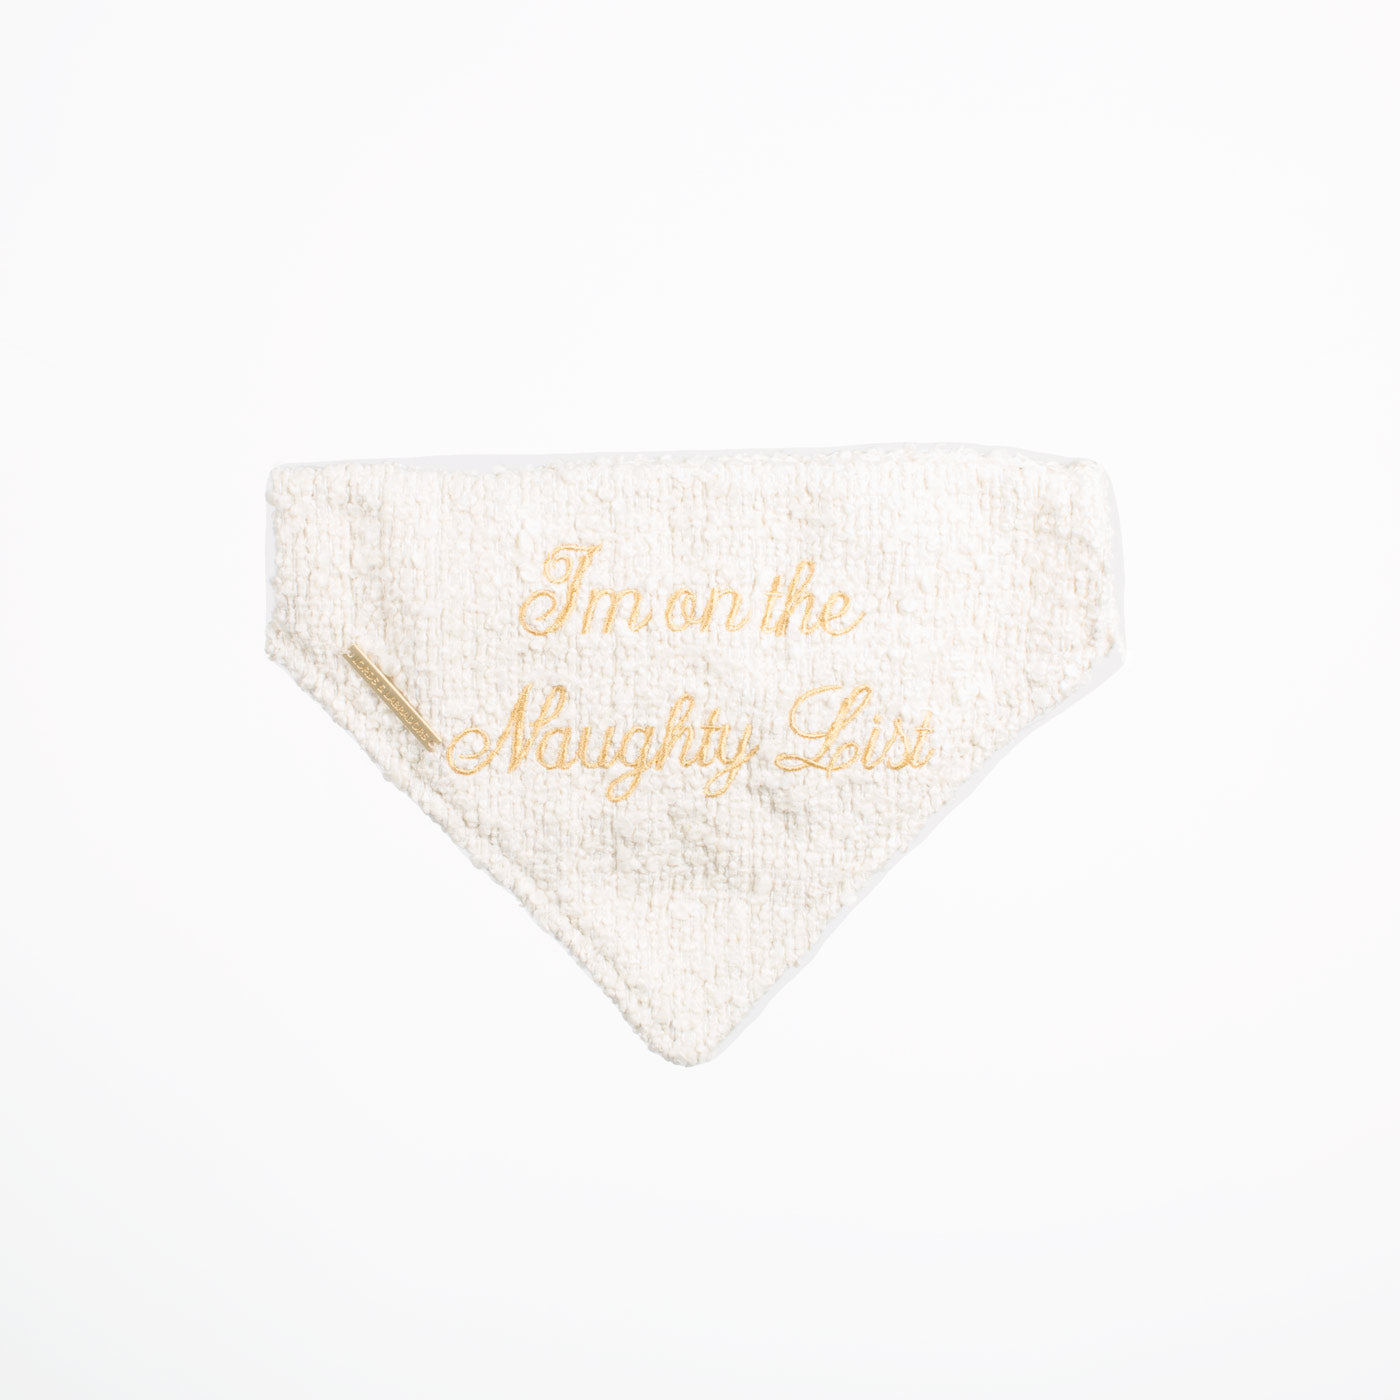 Discover The Perfect Bandana For Dogs, ' I'm on the Naughty List ' Dog Bandana In Luxury Ivory Bouclé, Available To Now at Lords & Labradors    